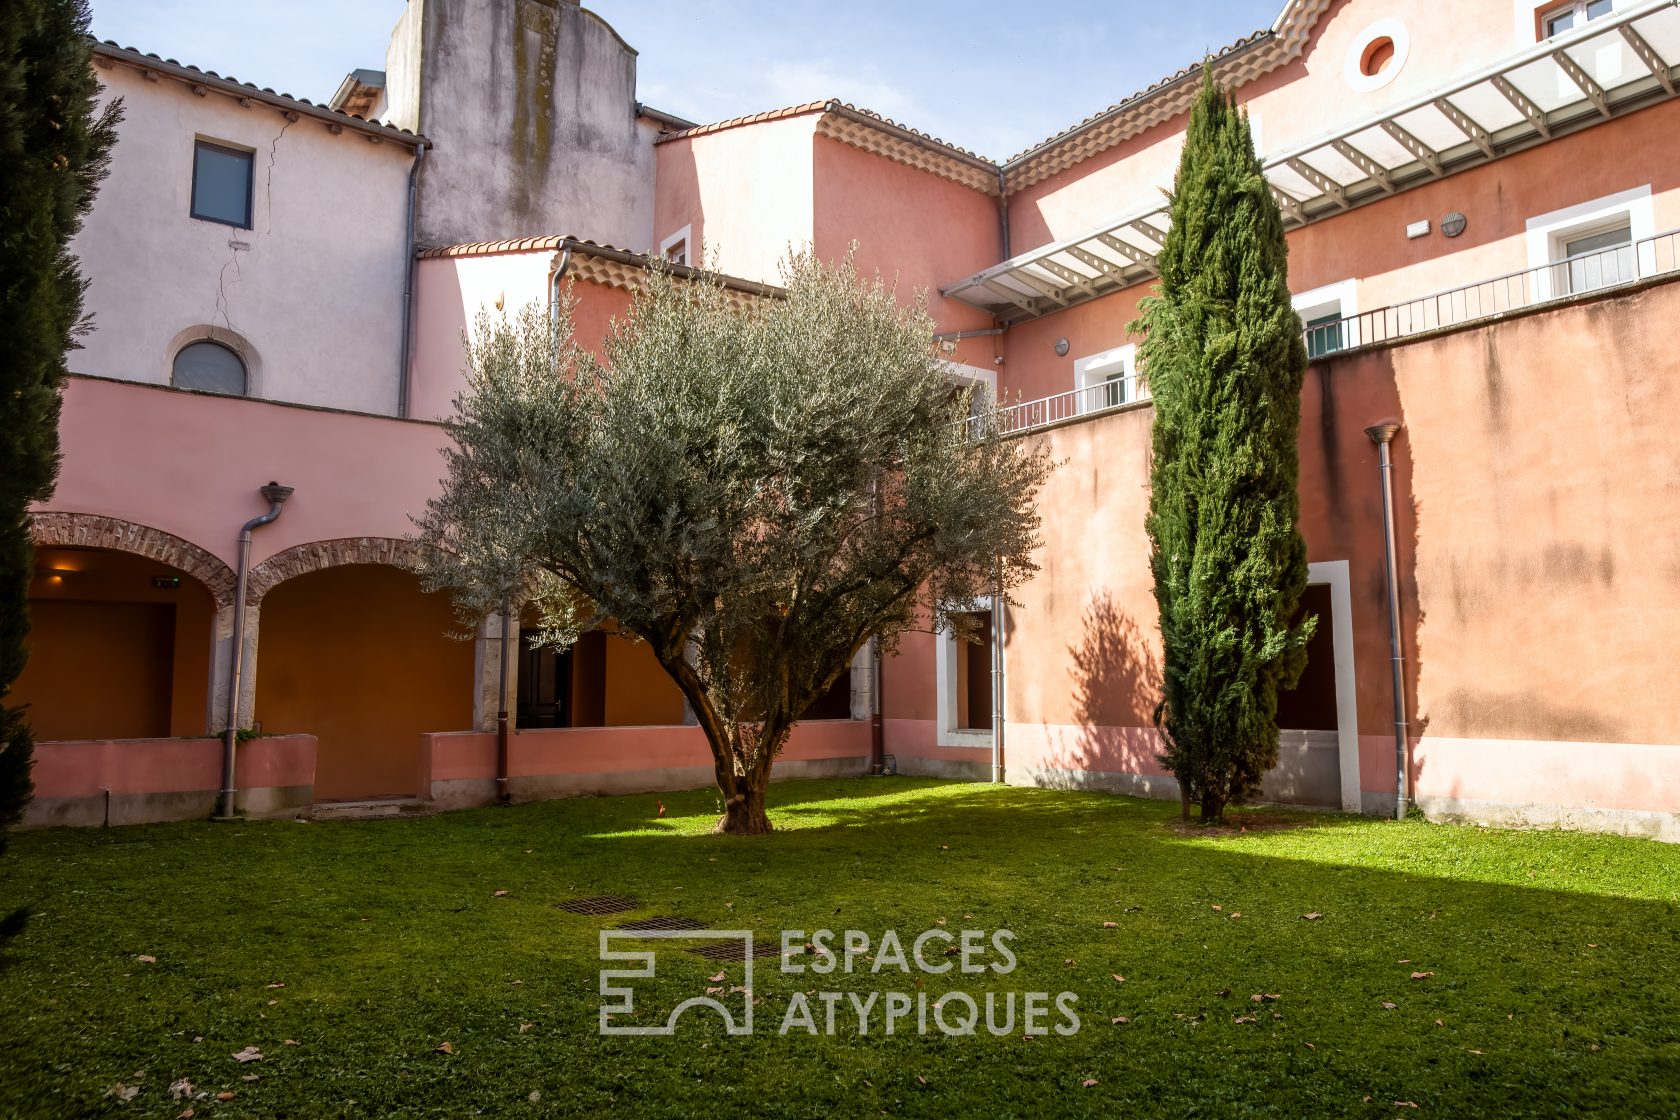 Flat with terrace and winter garden above the roofs of Montelimar